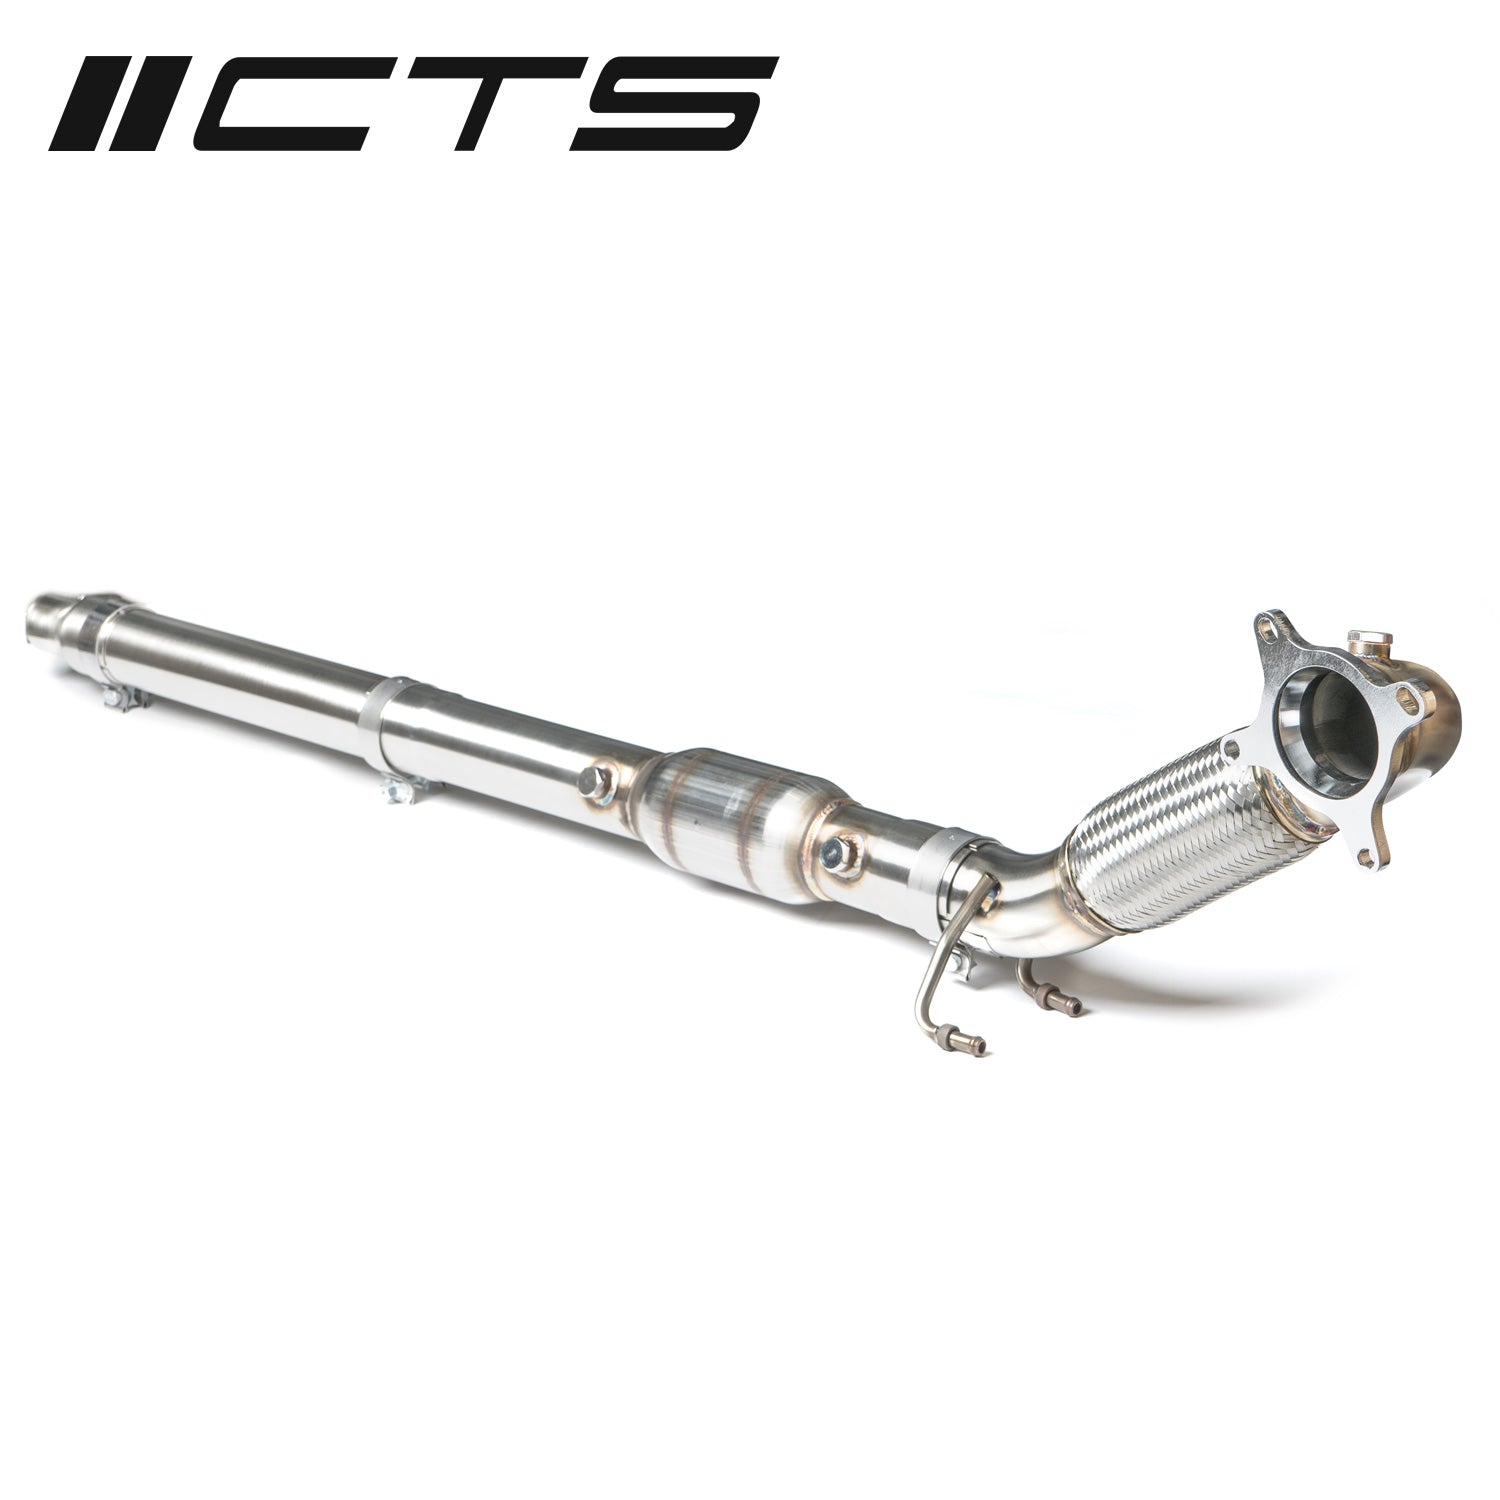 CTS TURBO AUDI/VW 2.0T FWD EXHAUST DOWNPIPE WITH HIGH-FLOW CAT (MK5, MK6, 8P A3, 8J TT)